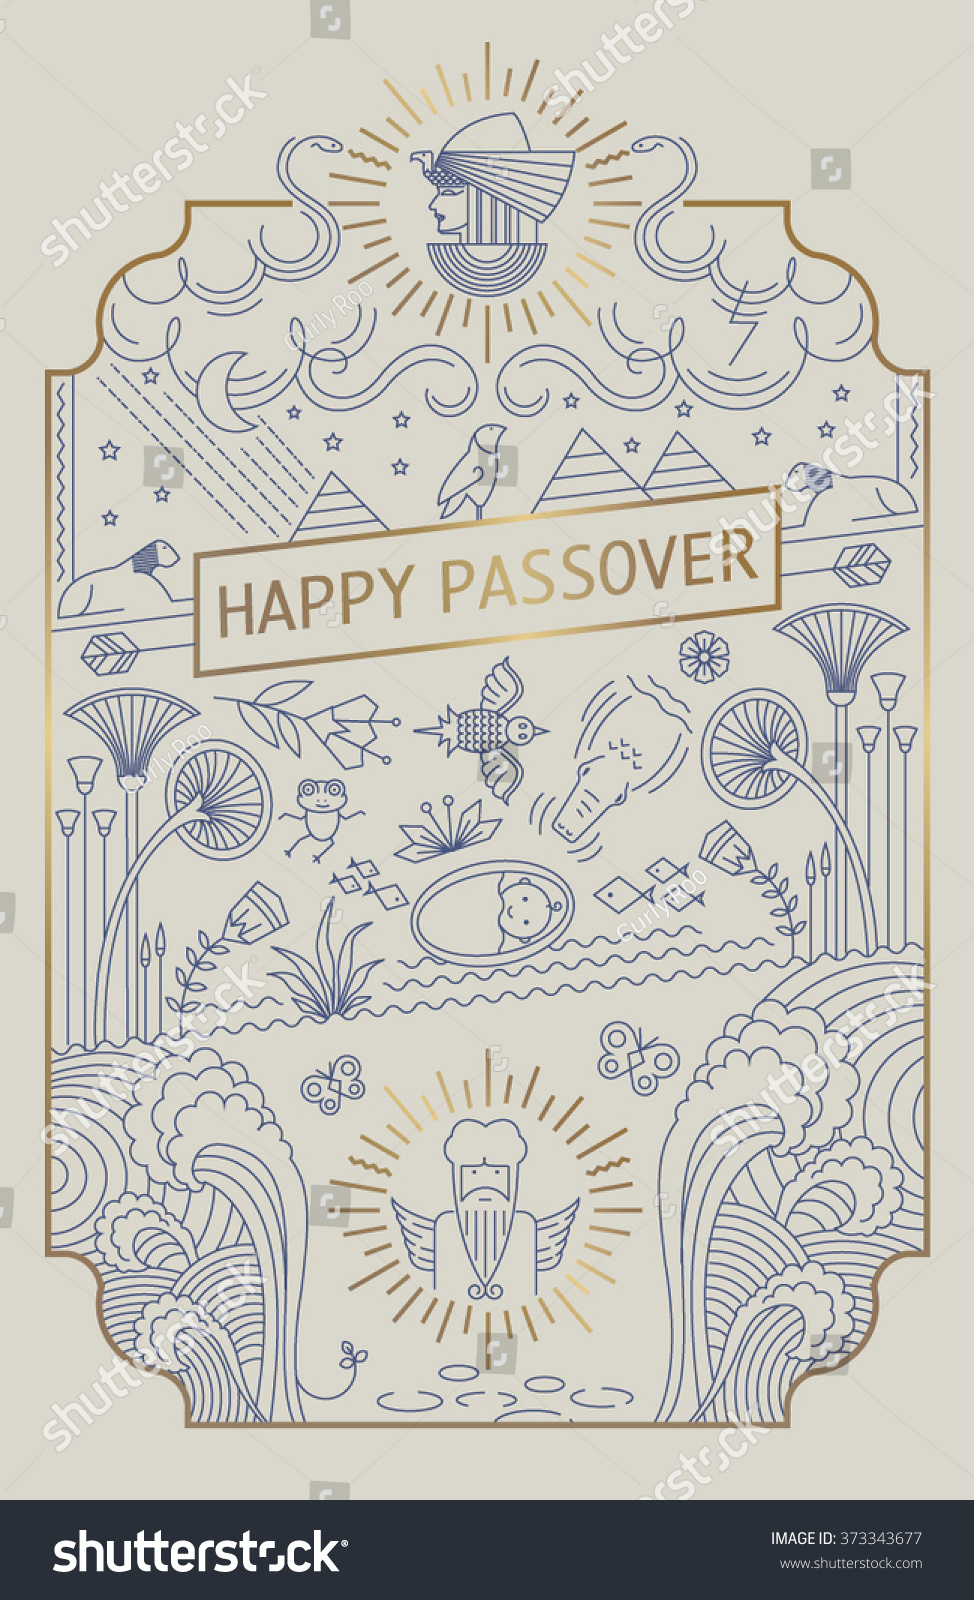 Passover line art card gold foil stock vector royalty free